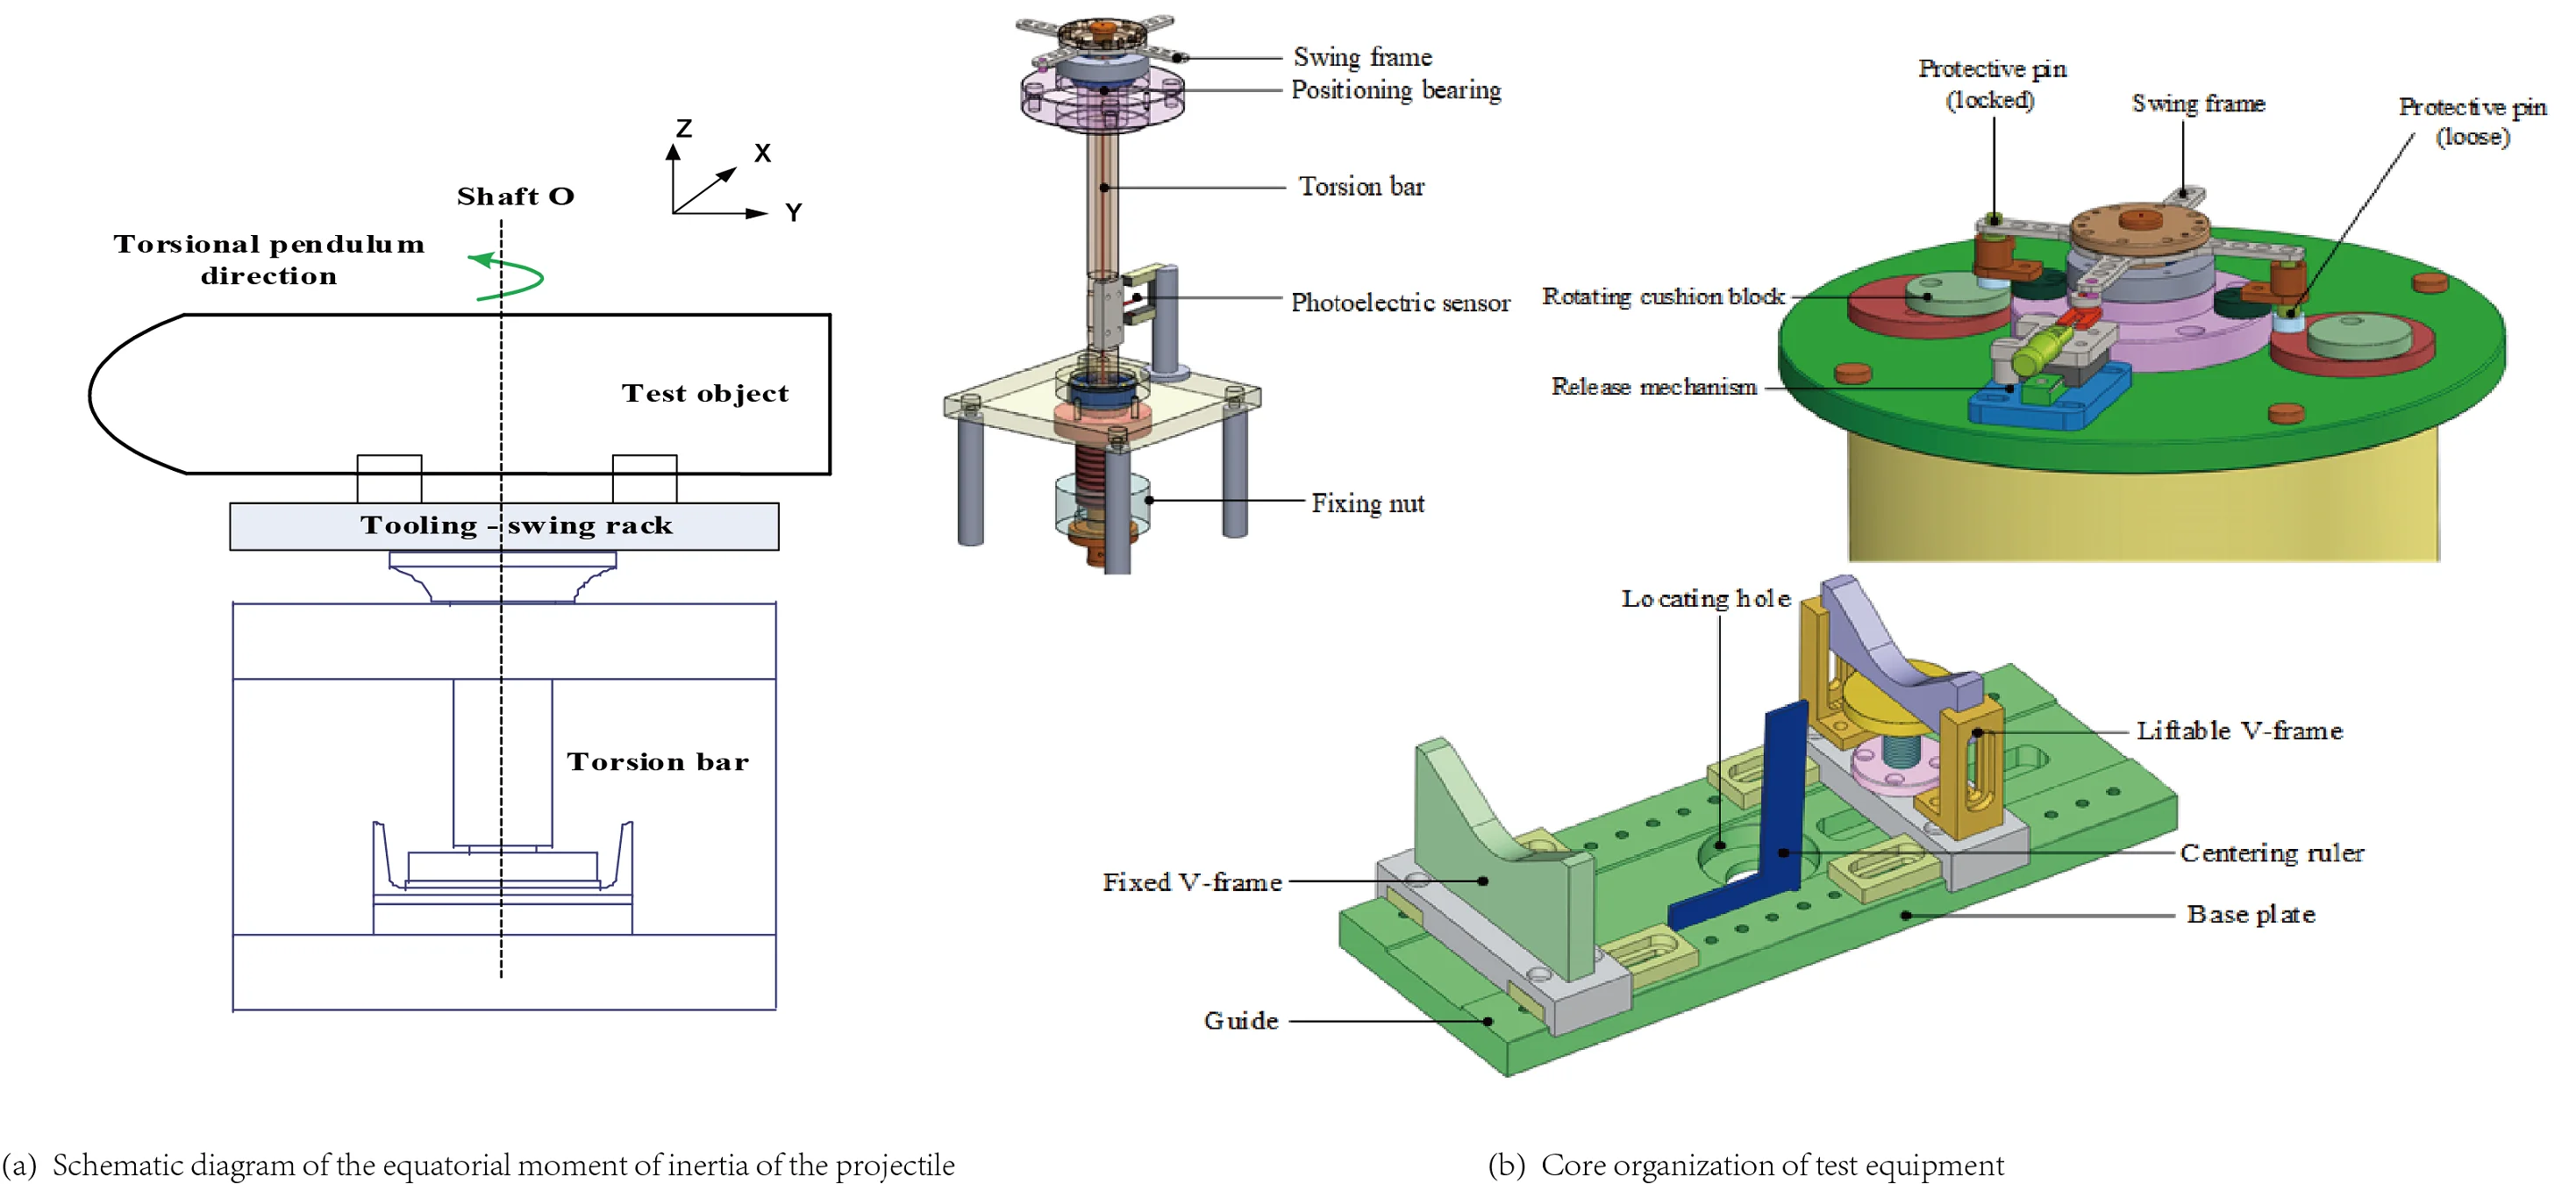 Design and accuracy test of equatorial moment of inertia test equipment for projectile and rocket